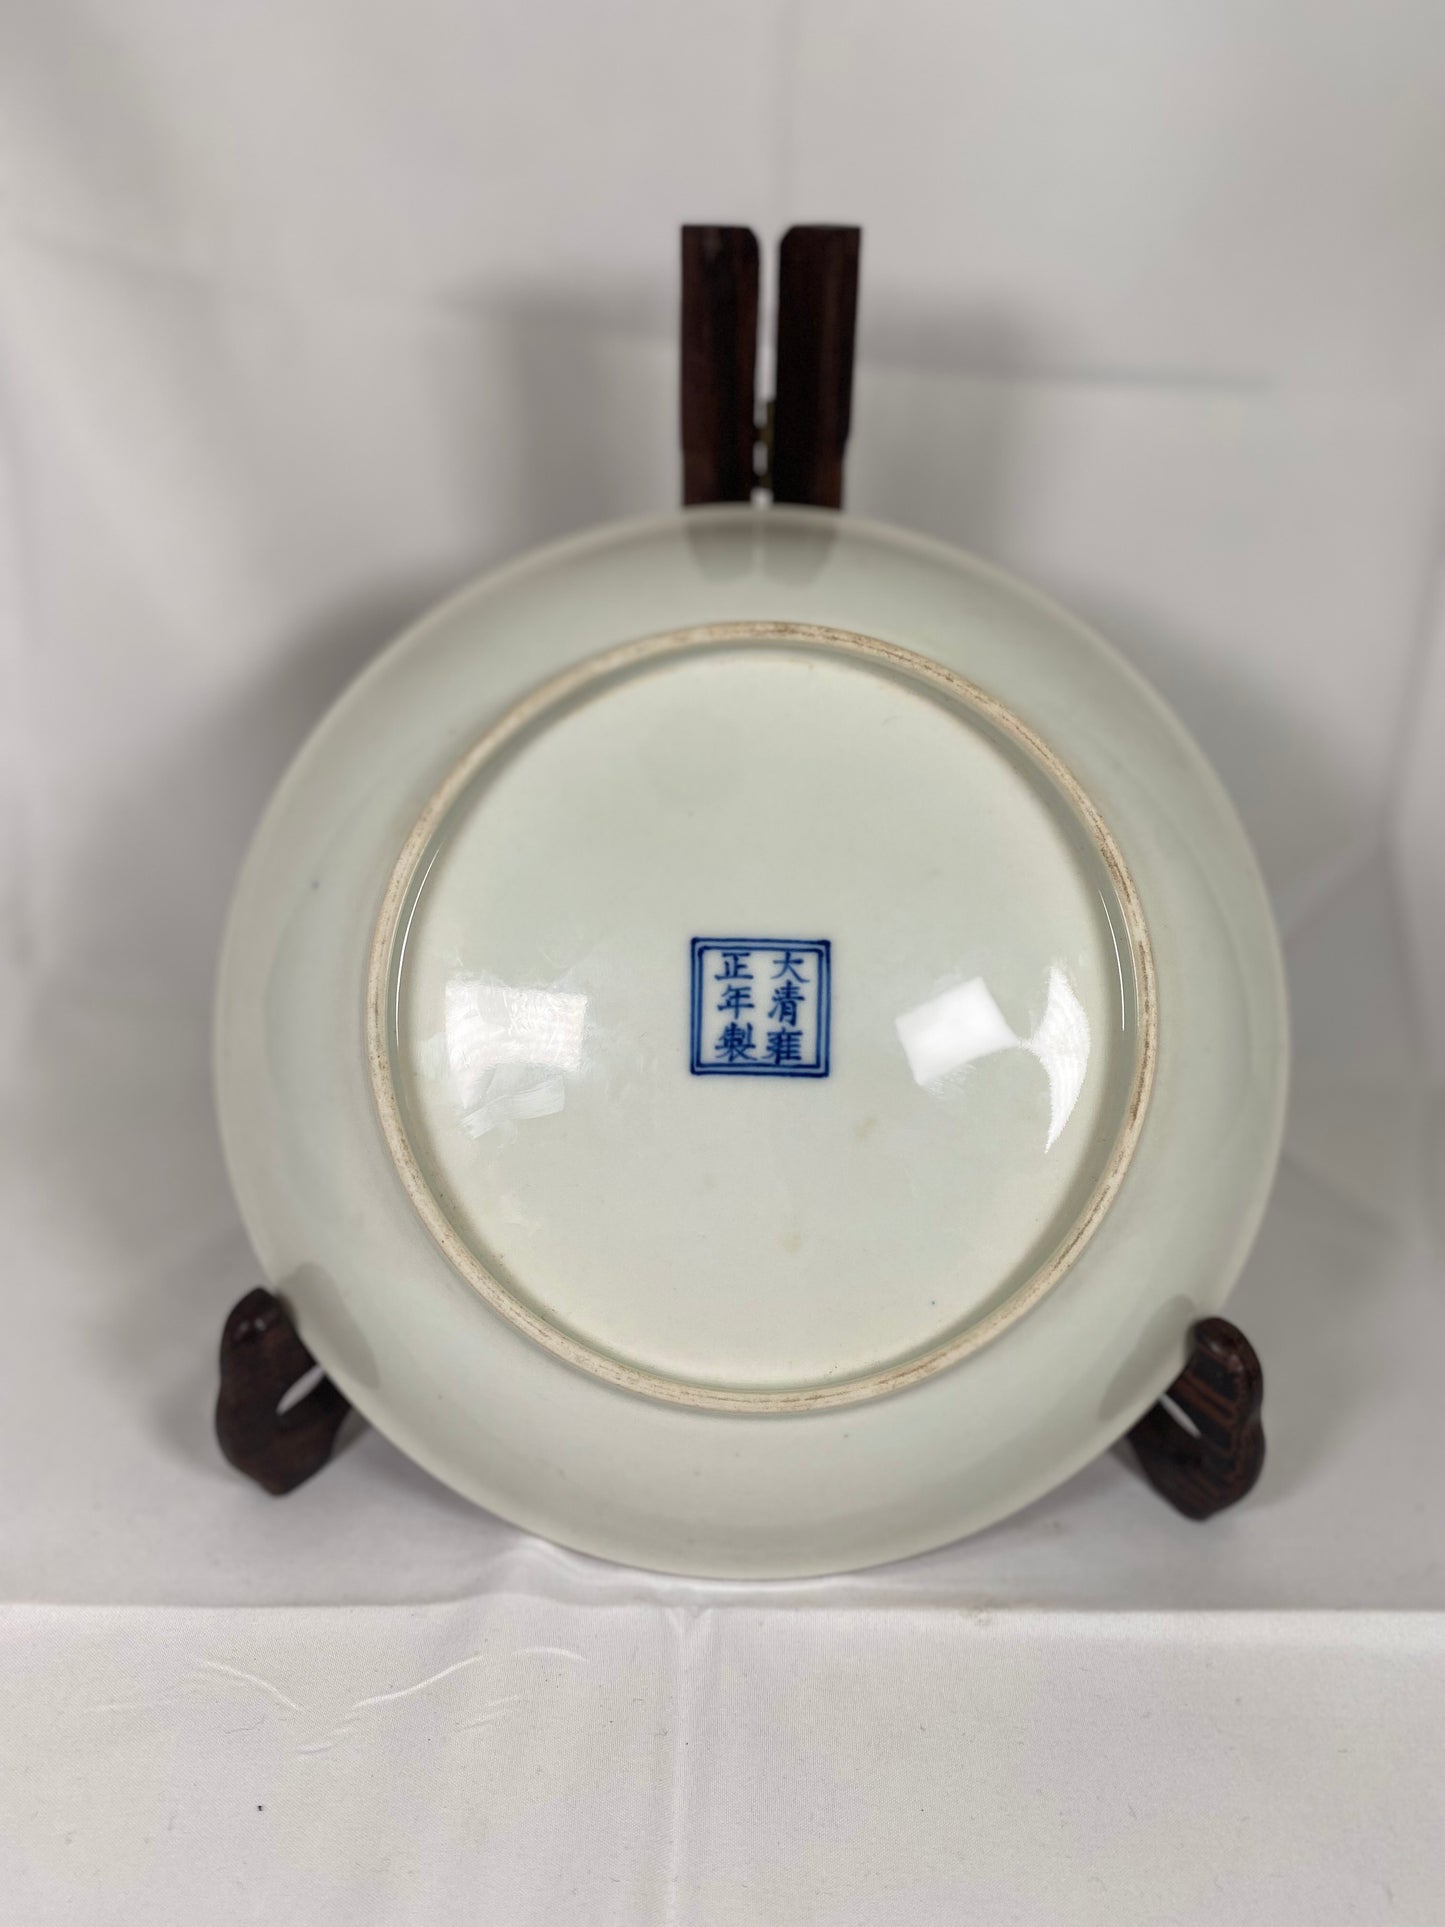 Chinese Republic period Porcelain Plate with Dragon and Cloud pattern in Iron Red Glaze